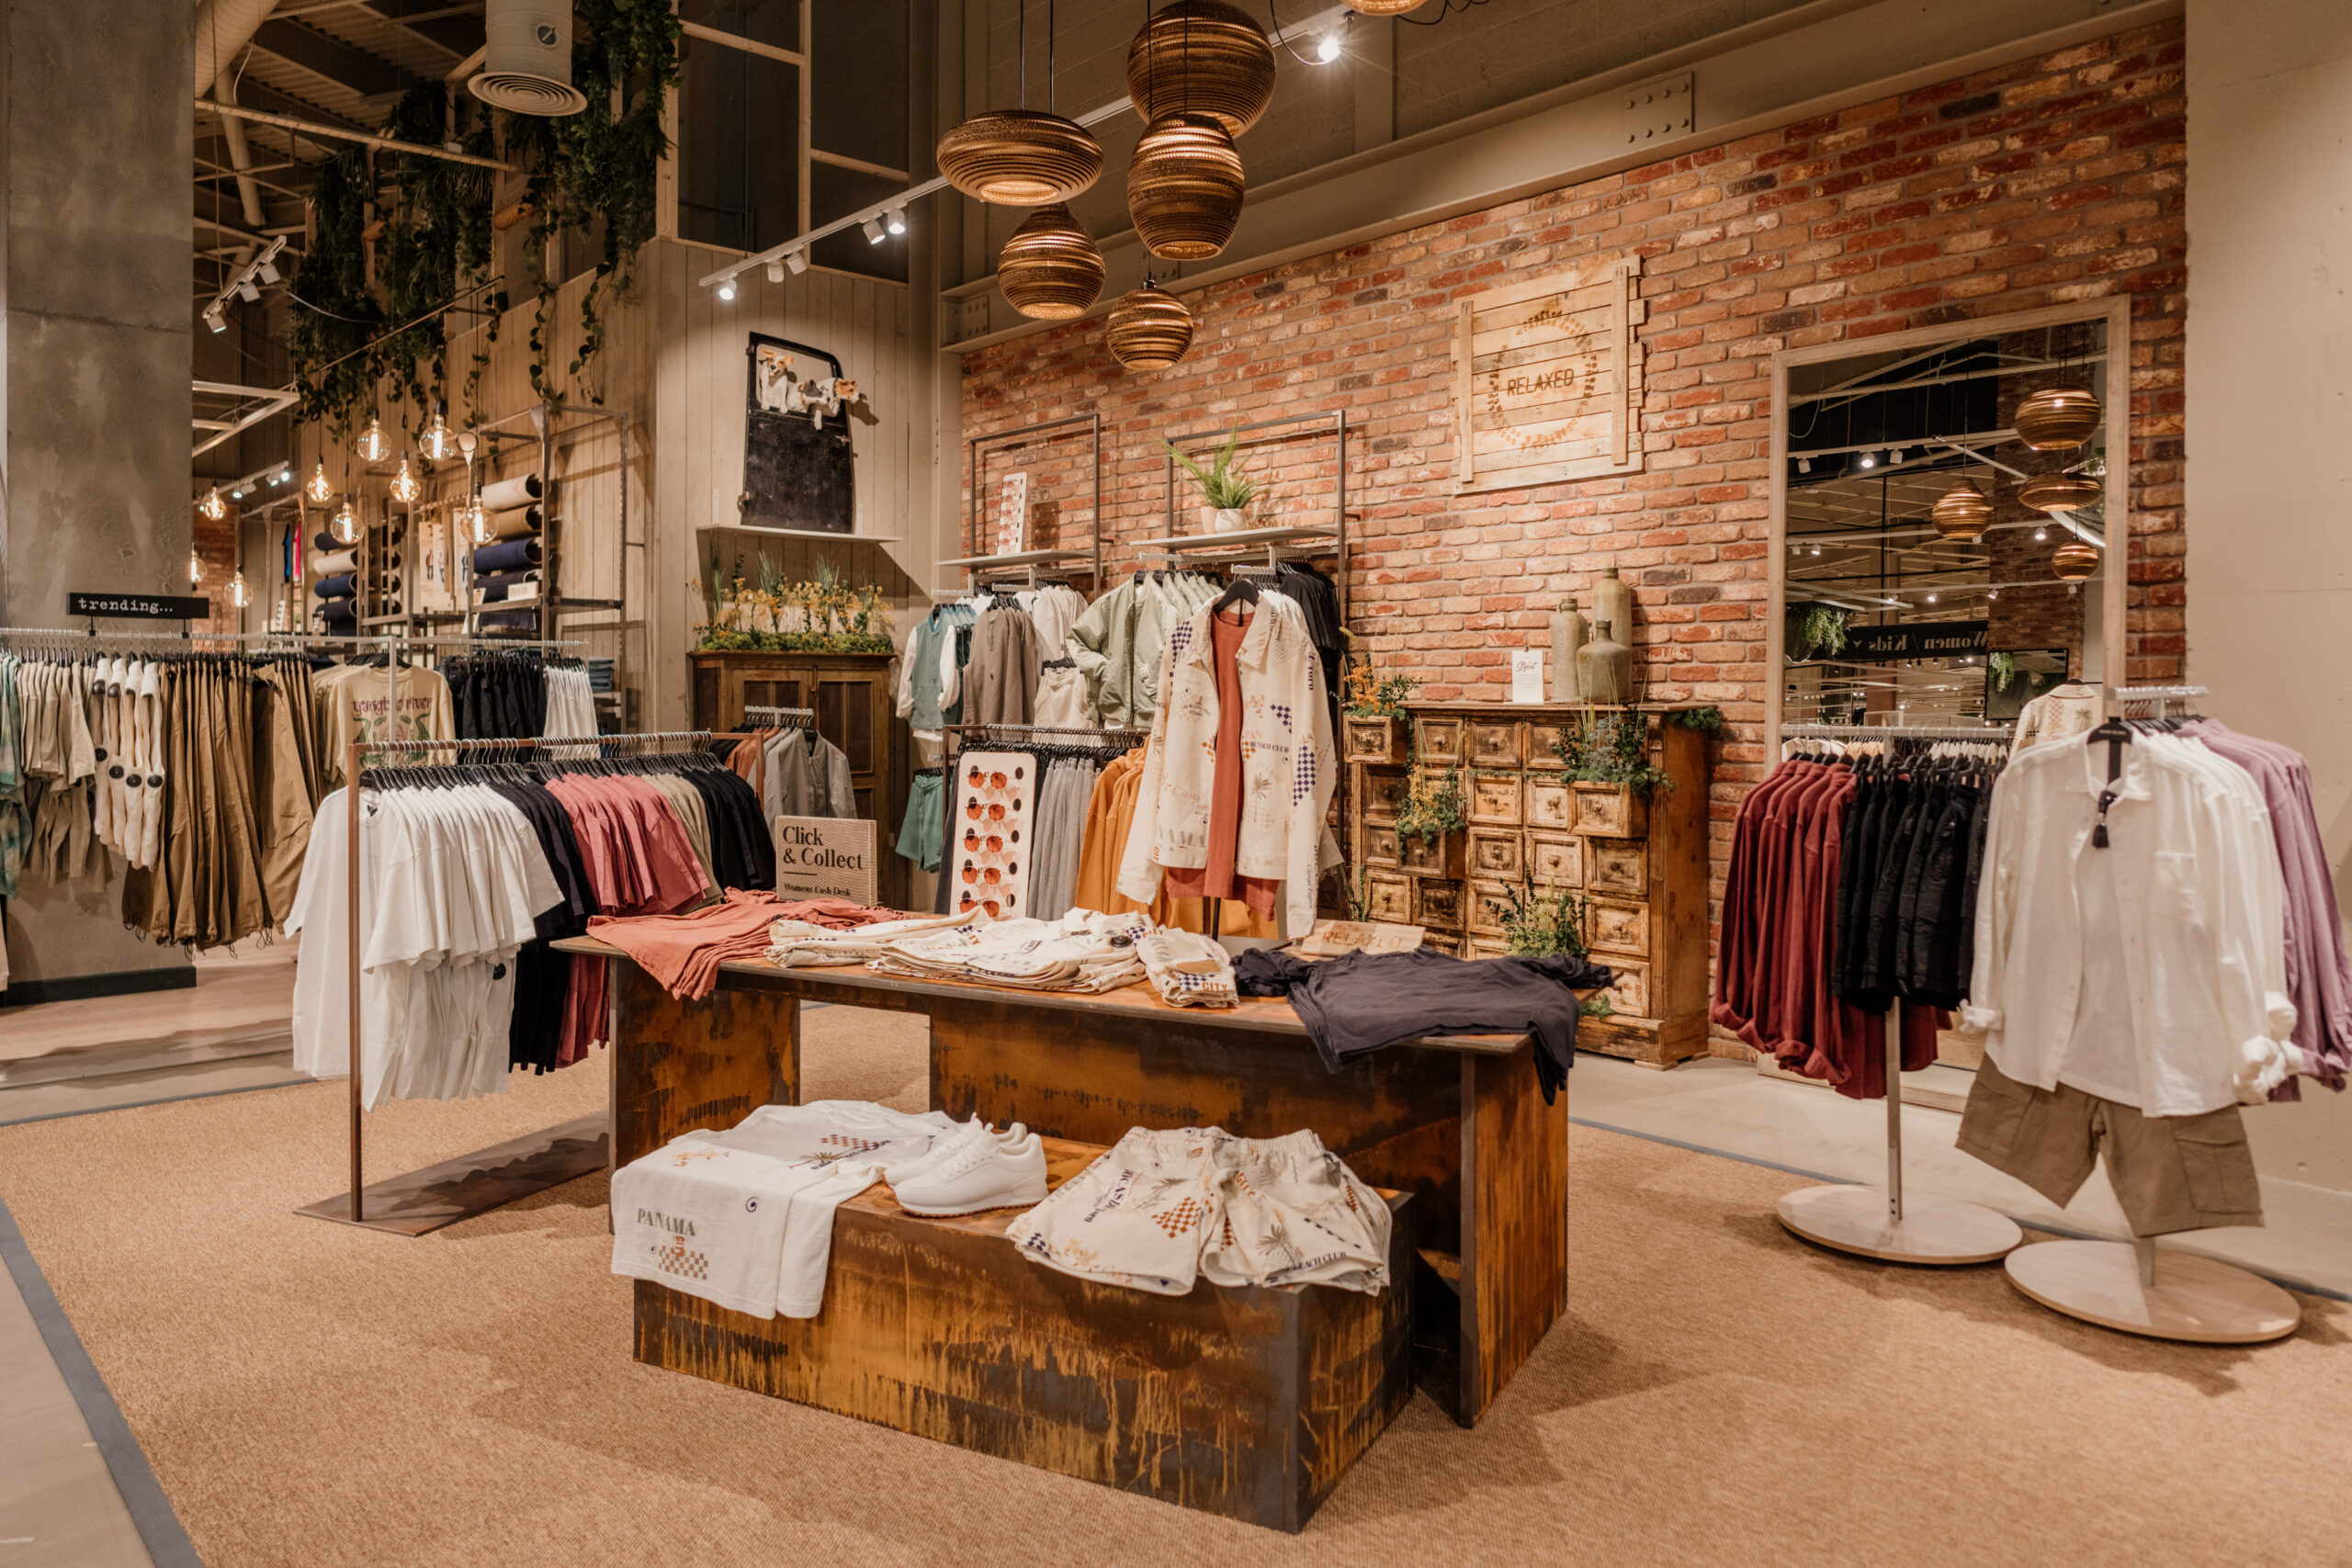 In pictures: Inside River Island's new concept store at Trafford Centre ...